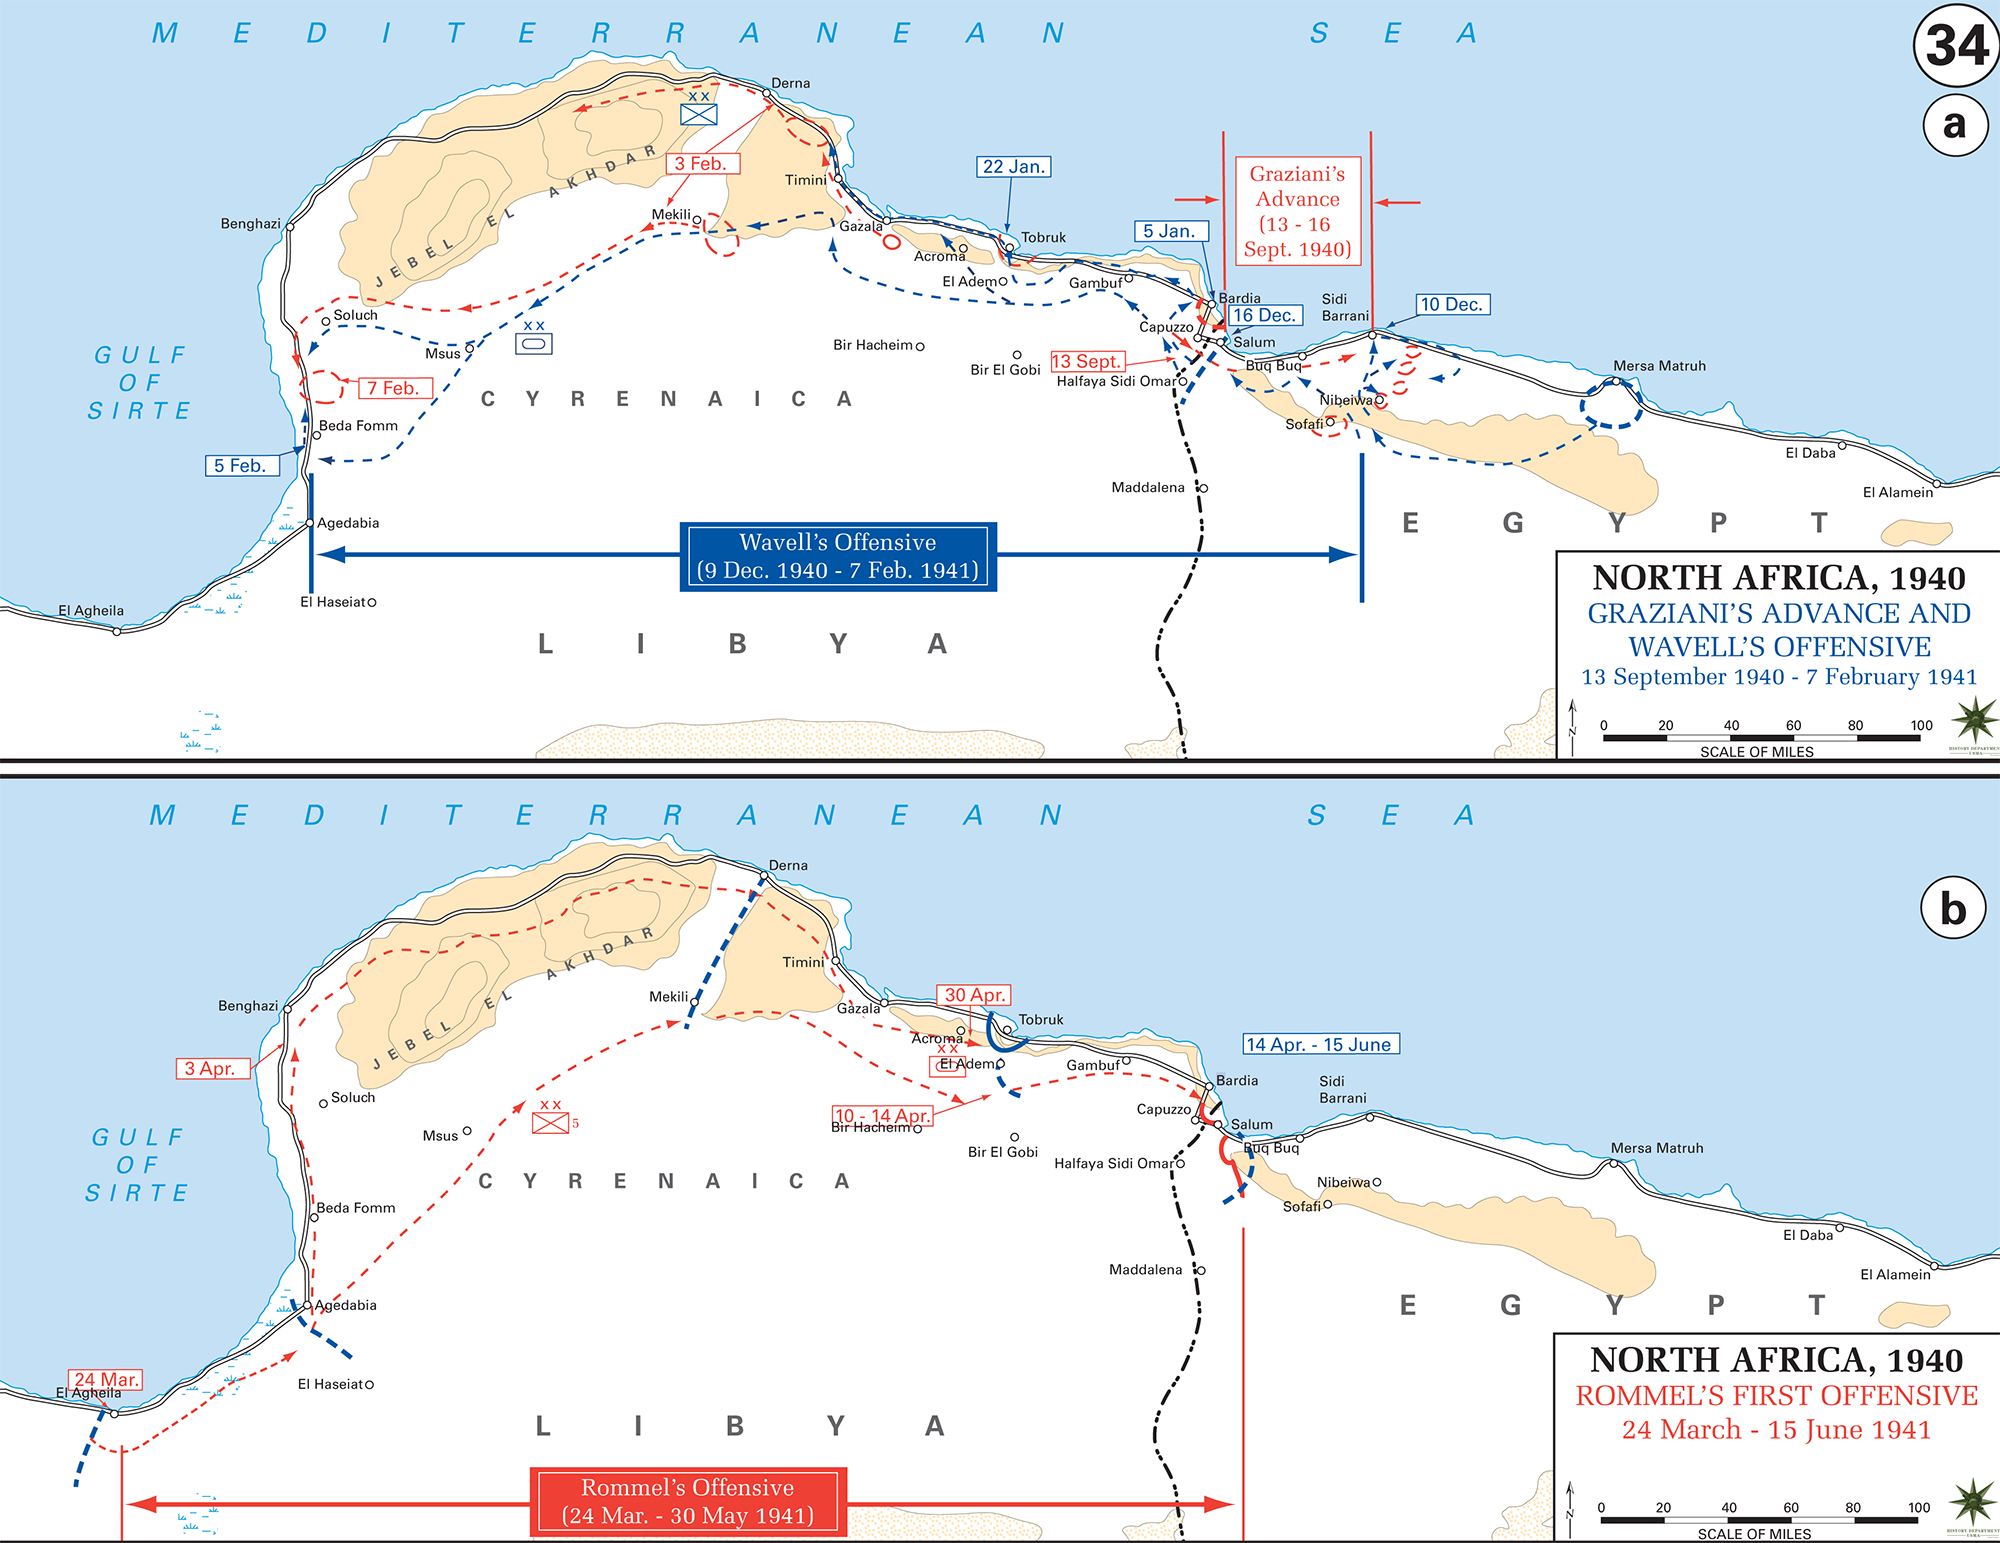 Map WWII North Africa 1940/41. Graziani's Advance and Wavell's Offensive, Rommel's First Offensive